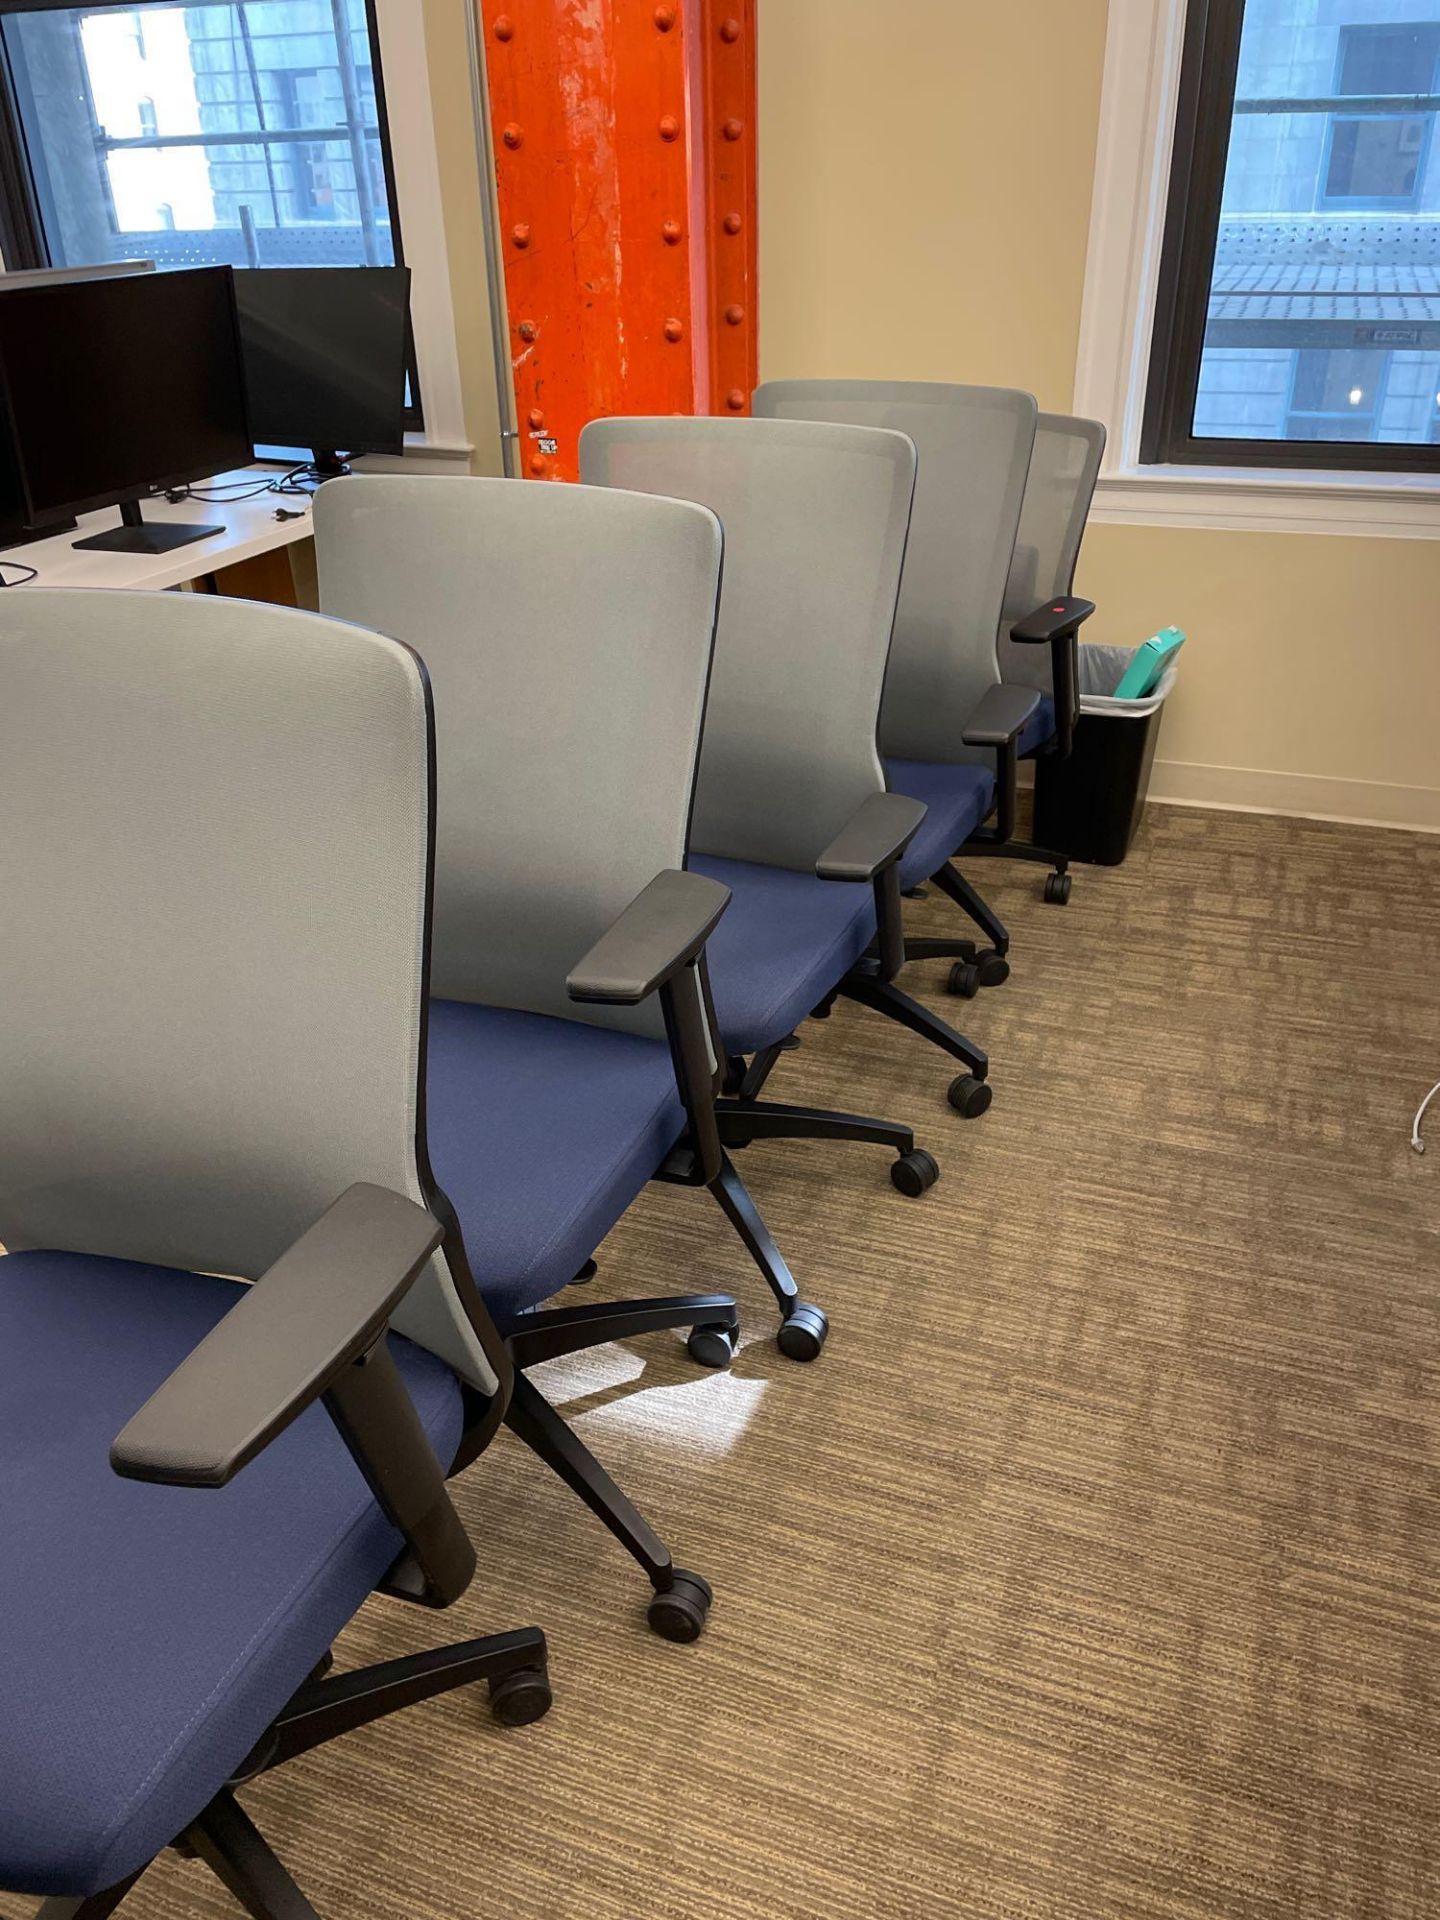 8 office chairs - Image 4 of 4